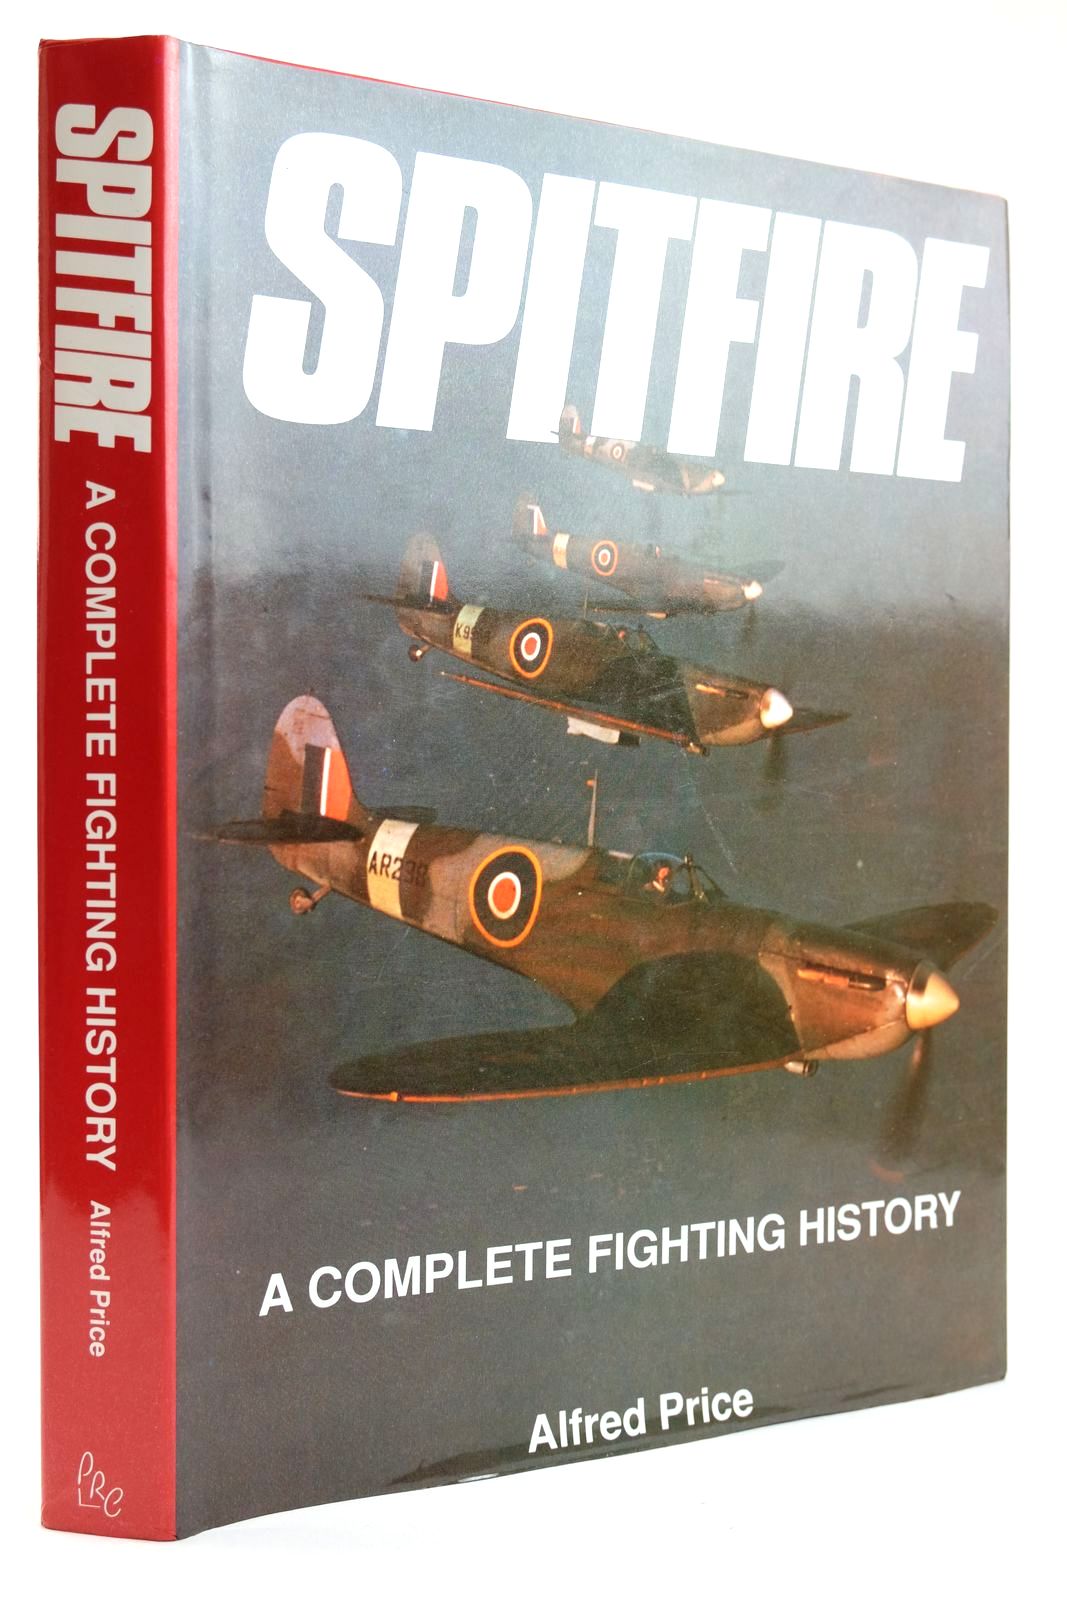 Photo of SPITFIRE A COMPLETE FIGHTING HISTORY written by Price, Alfred published by Promotional Reprint Company Ltd. (STOCK CODE: 2132152)  for sale by Stella & Rose's Books